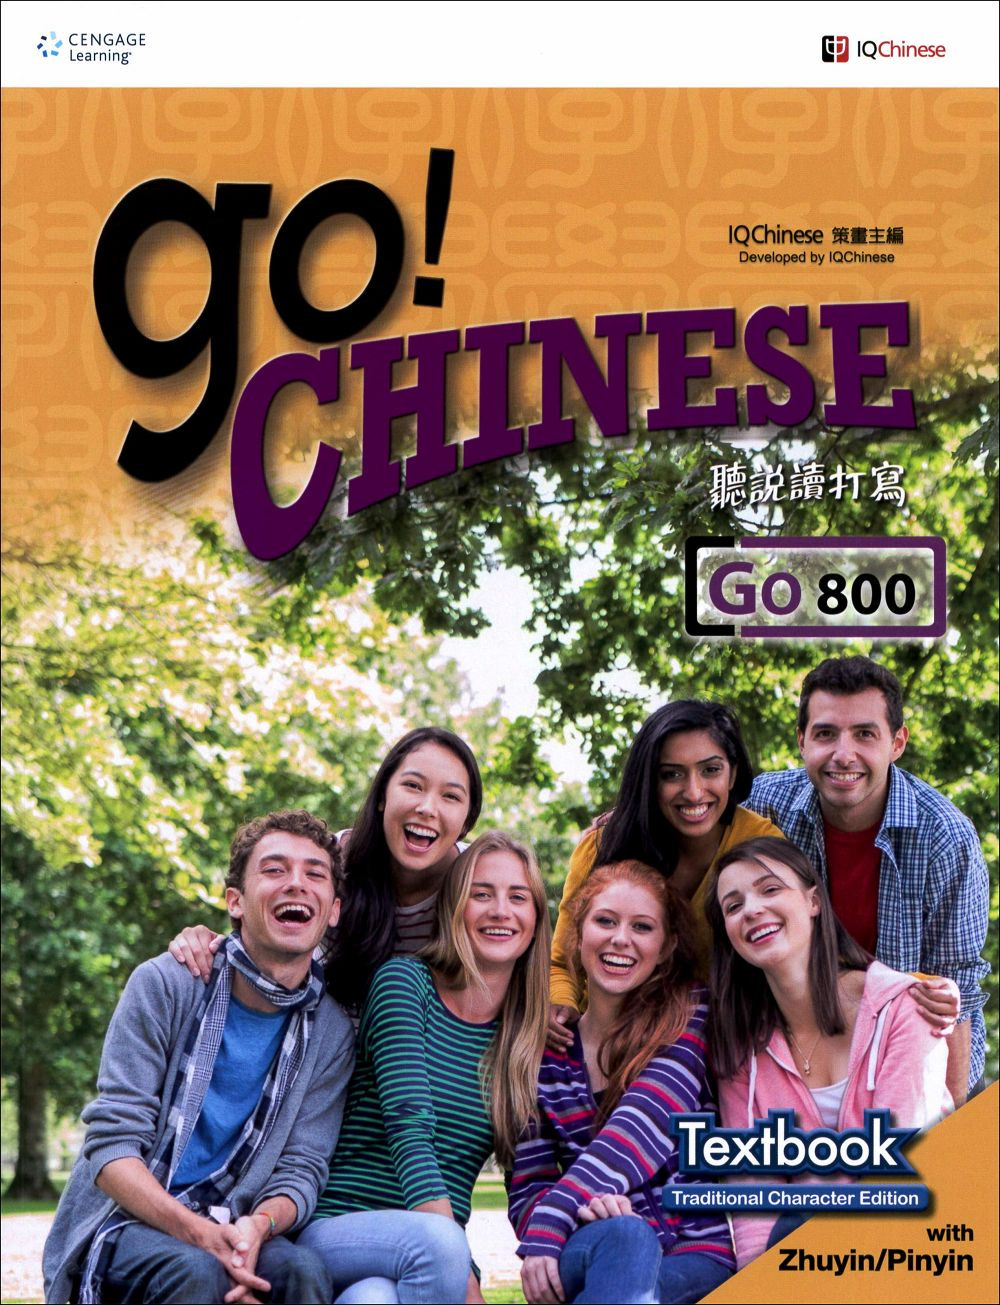 Go! Chinese Go800 Textbook (Traditional Character Edition with Zhuyin/Pinyin)